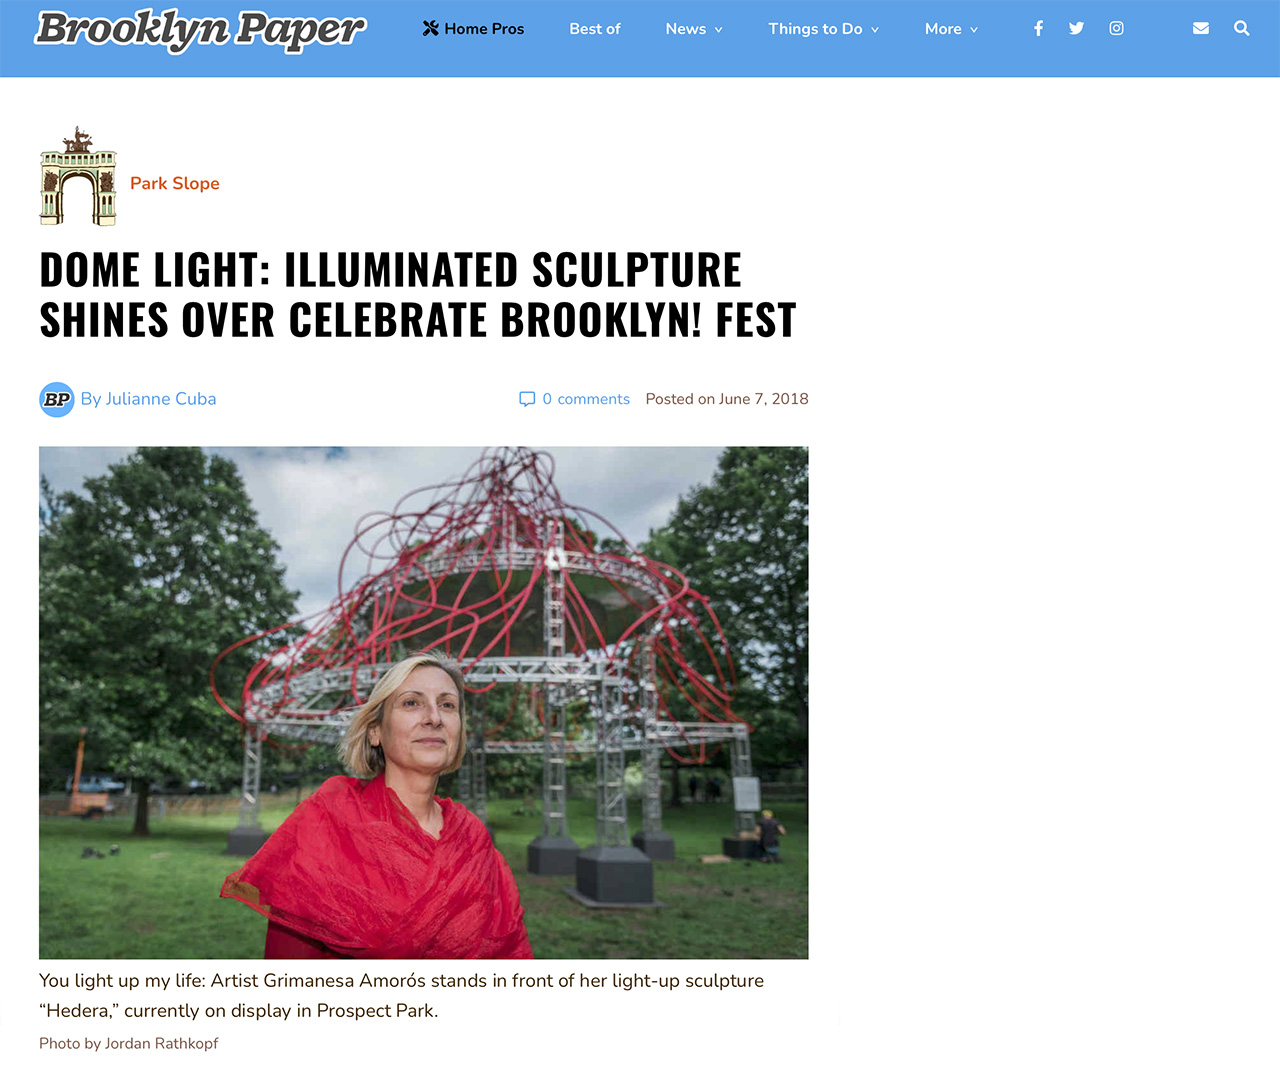  Brooklyn paper article featuring light sculpture HEDERA of grimanesa amoros at Prospect Park Brooklyn, NY